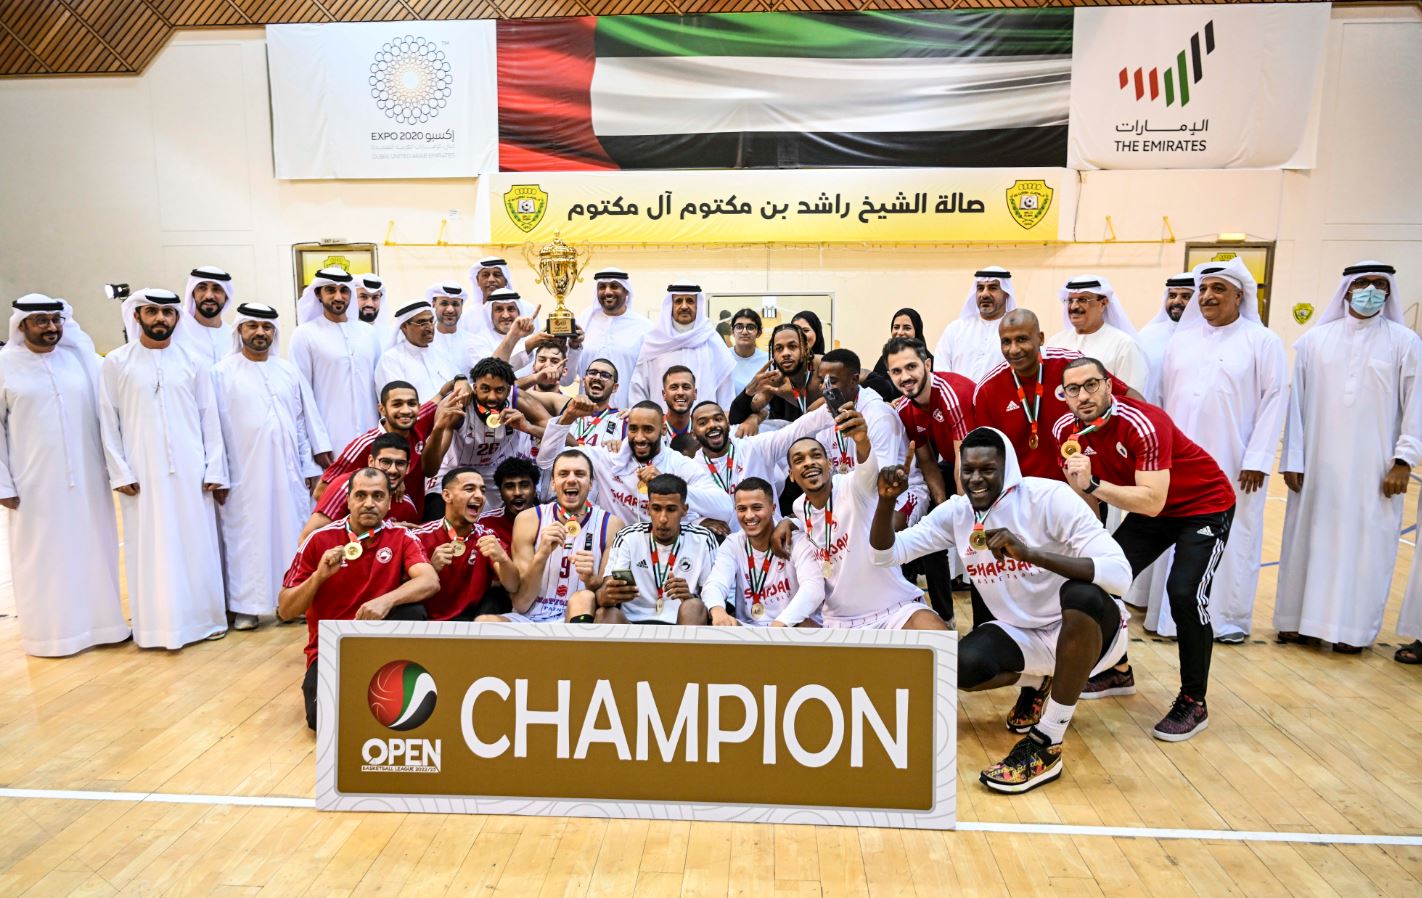 Sharjah retains the Basketball Federation Cup for the second year in a row